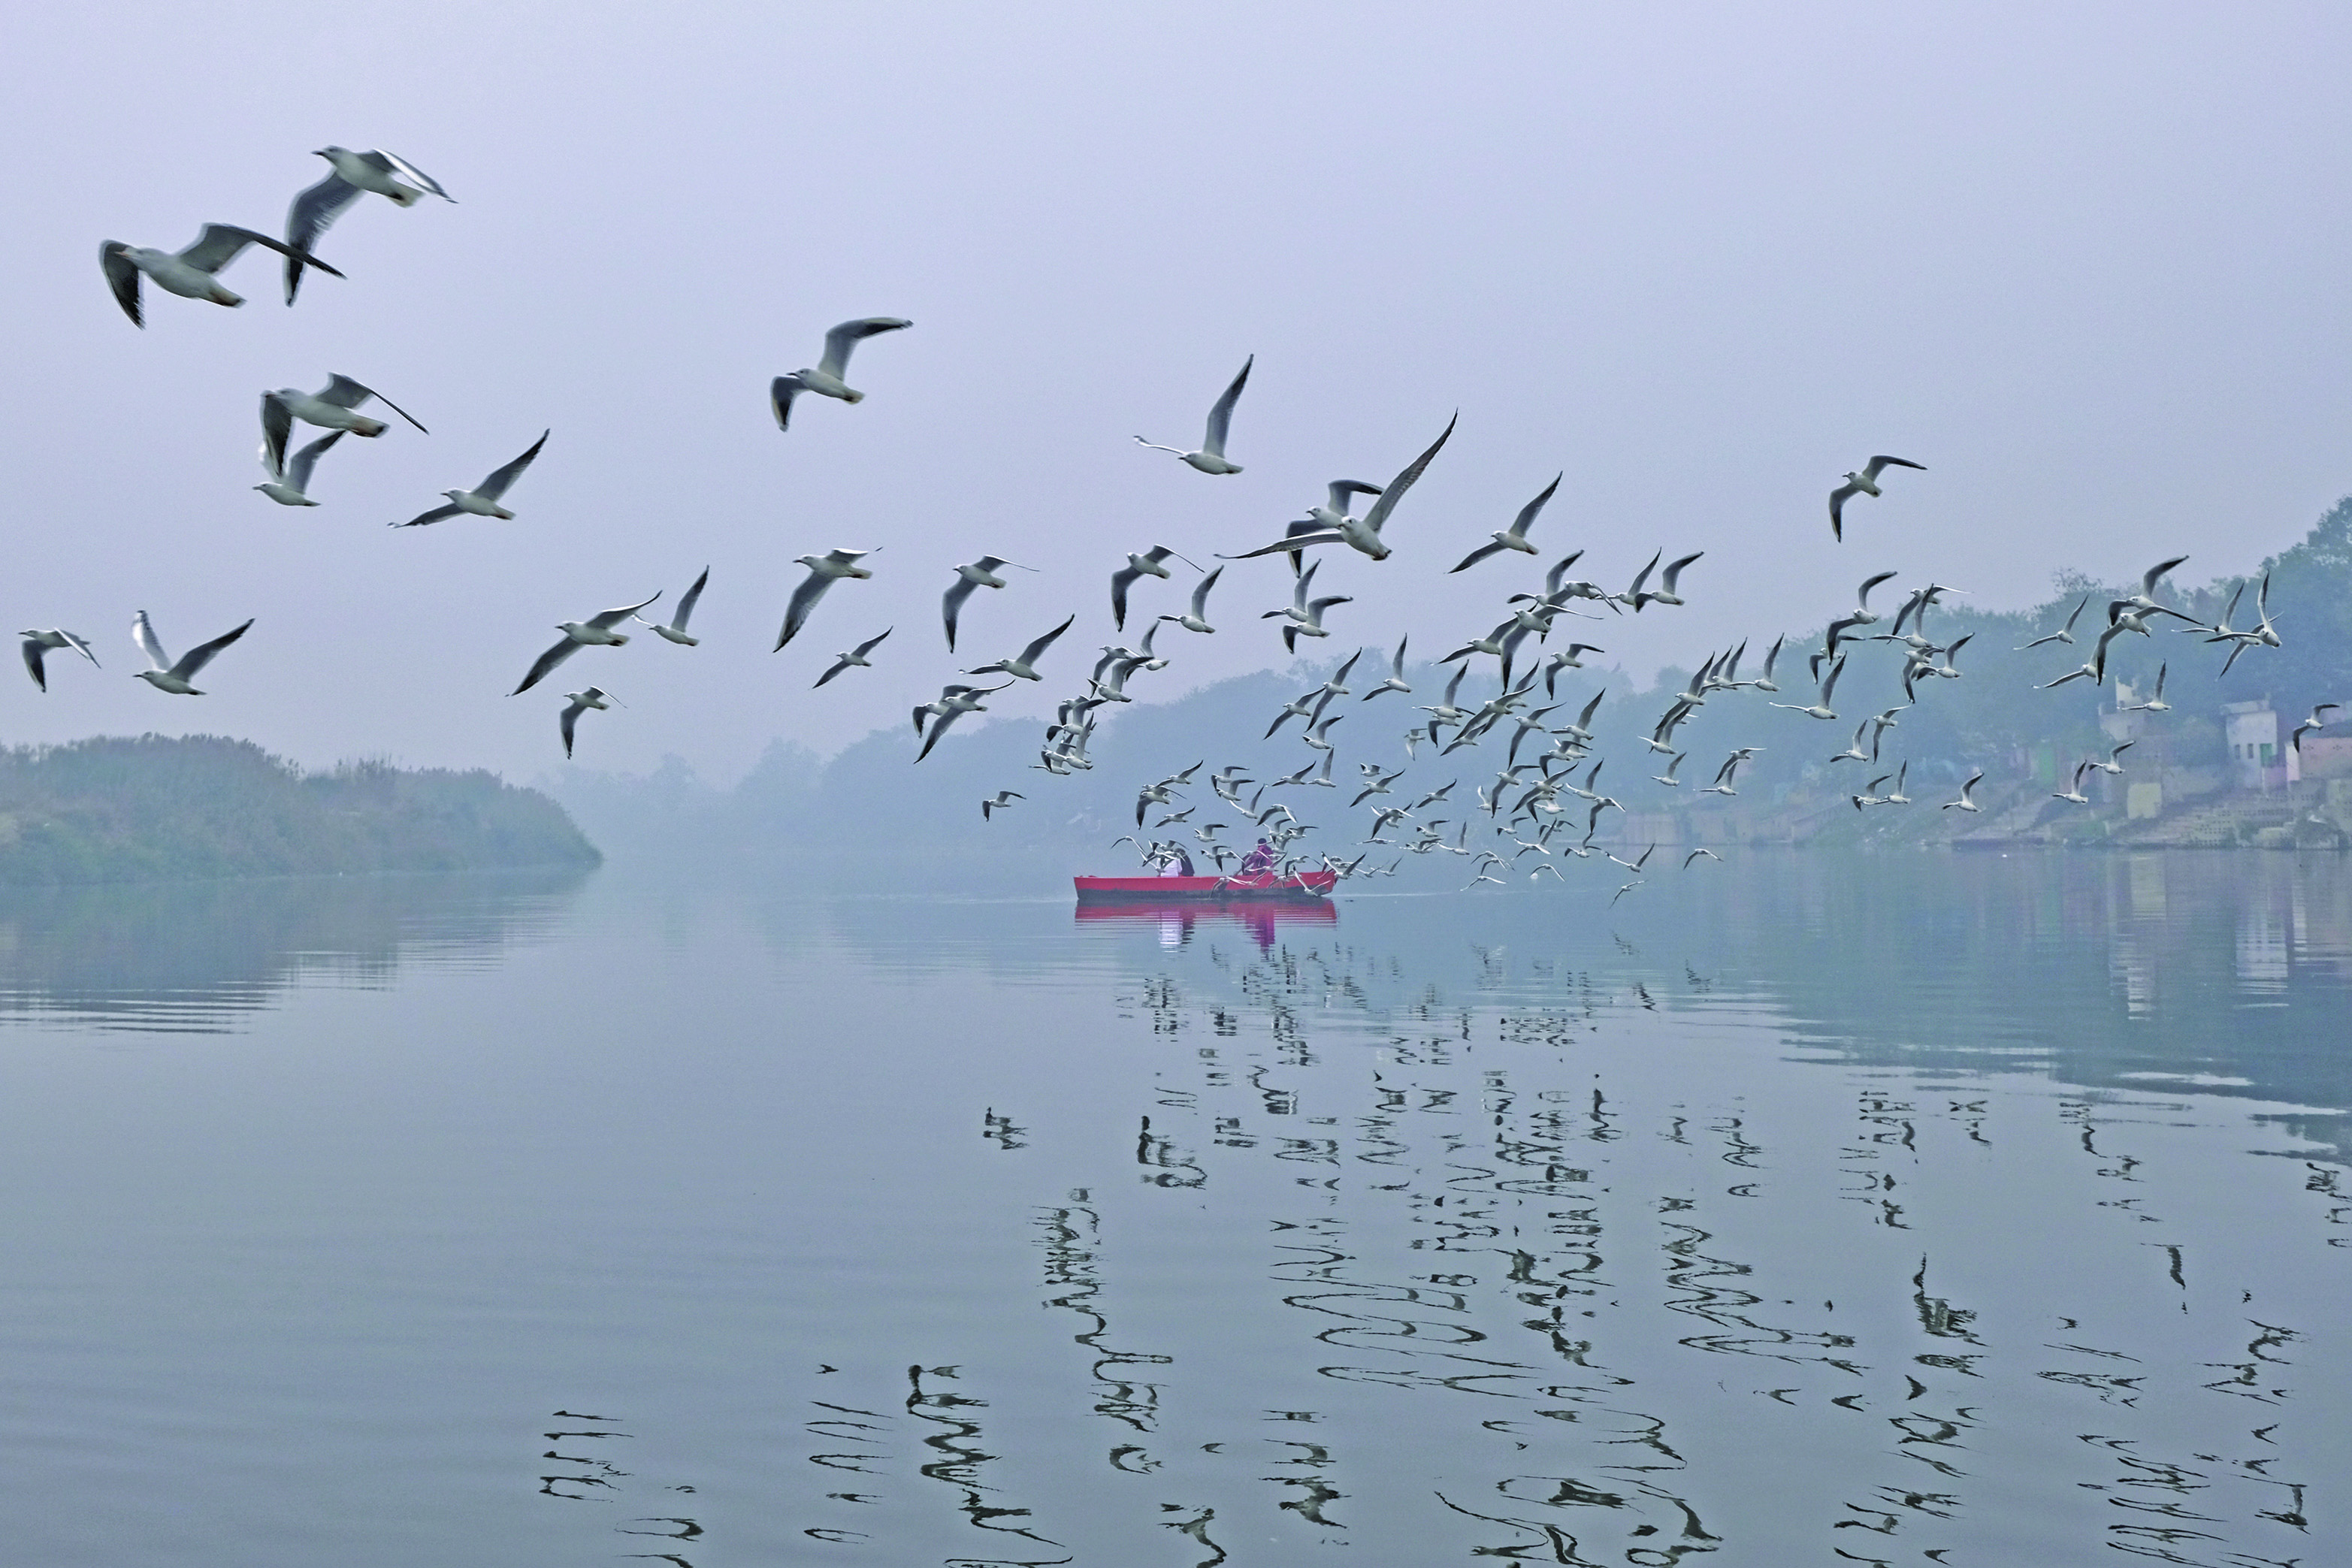 Migratory birds fly over a boat on the Yamuna River amidst heavy smog conditions in New Delhi on January 21, 2020. (Photo by Noemi Cassanelli / AFP)